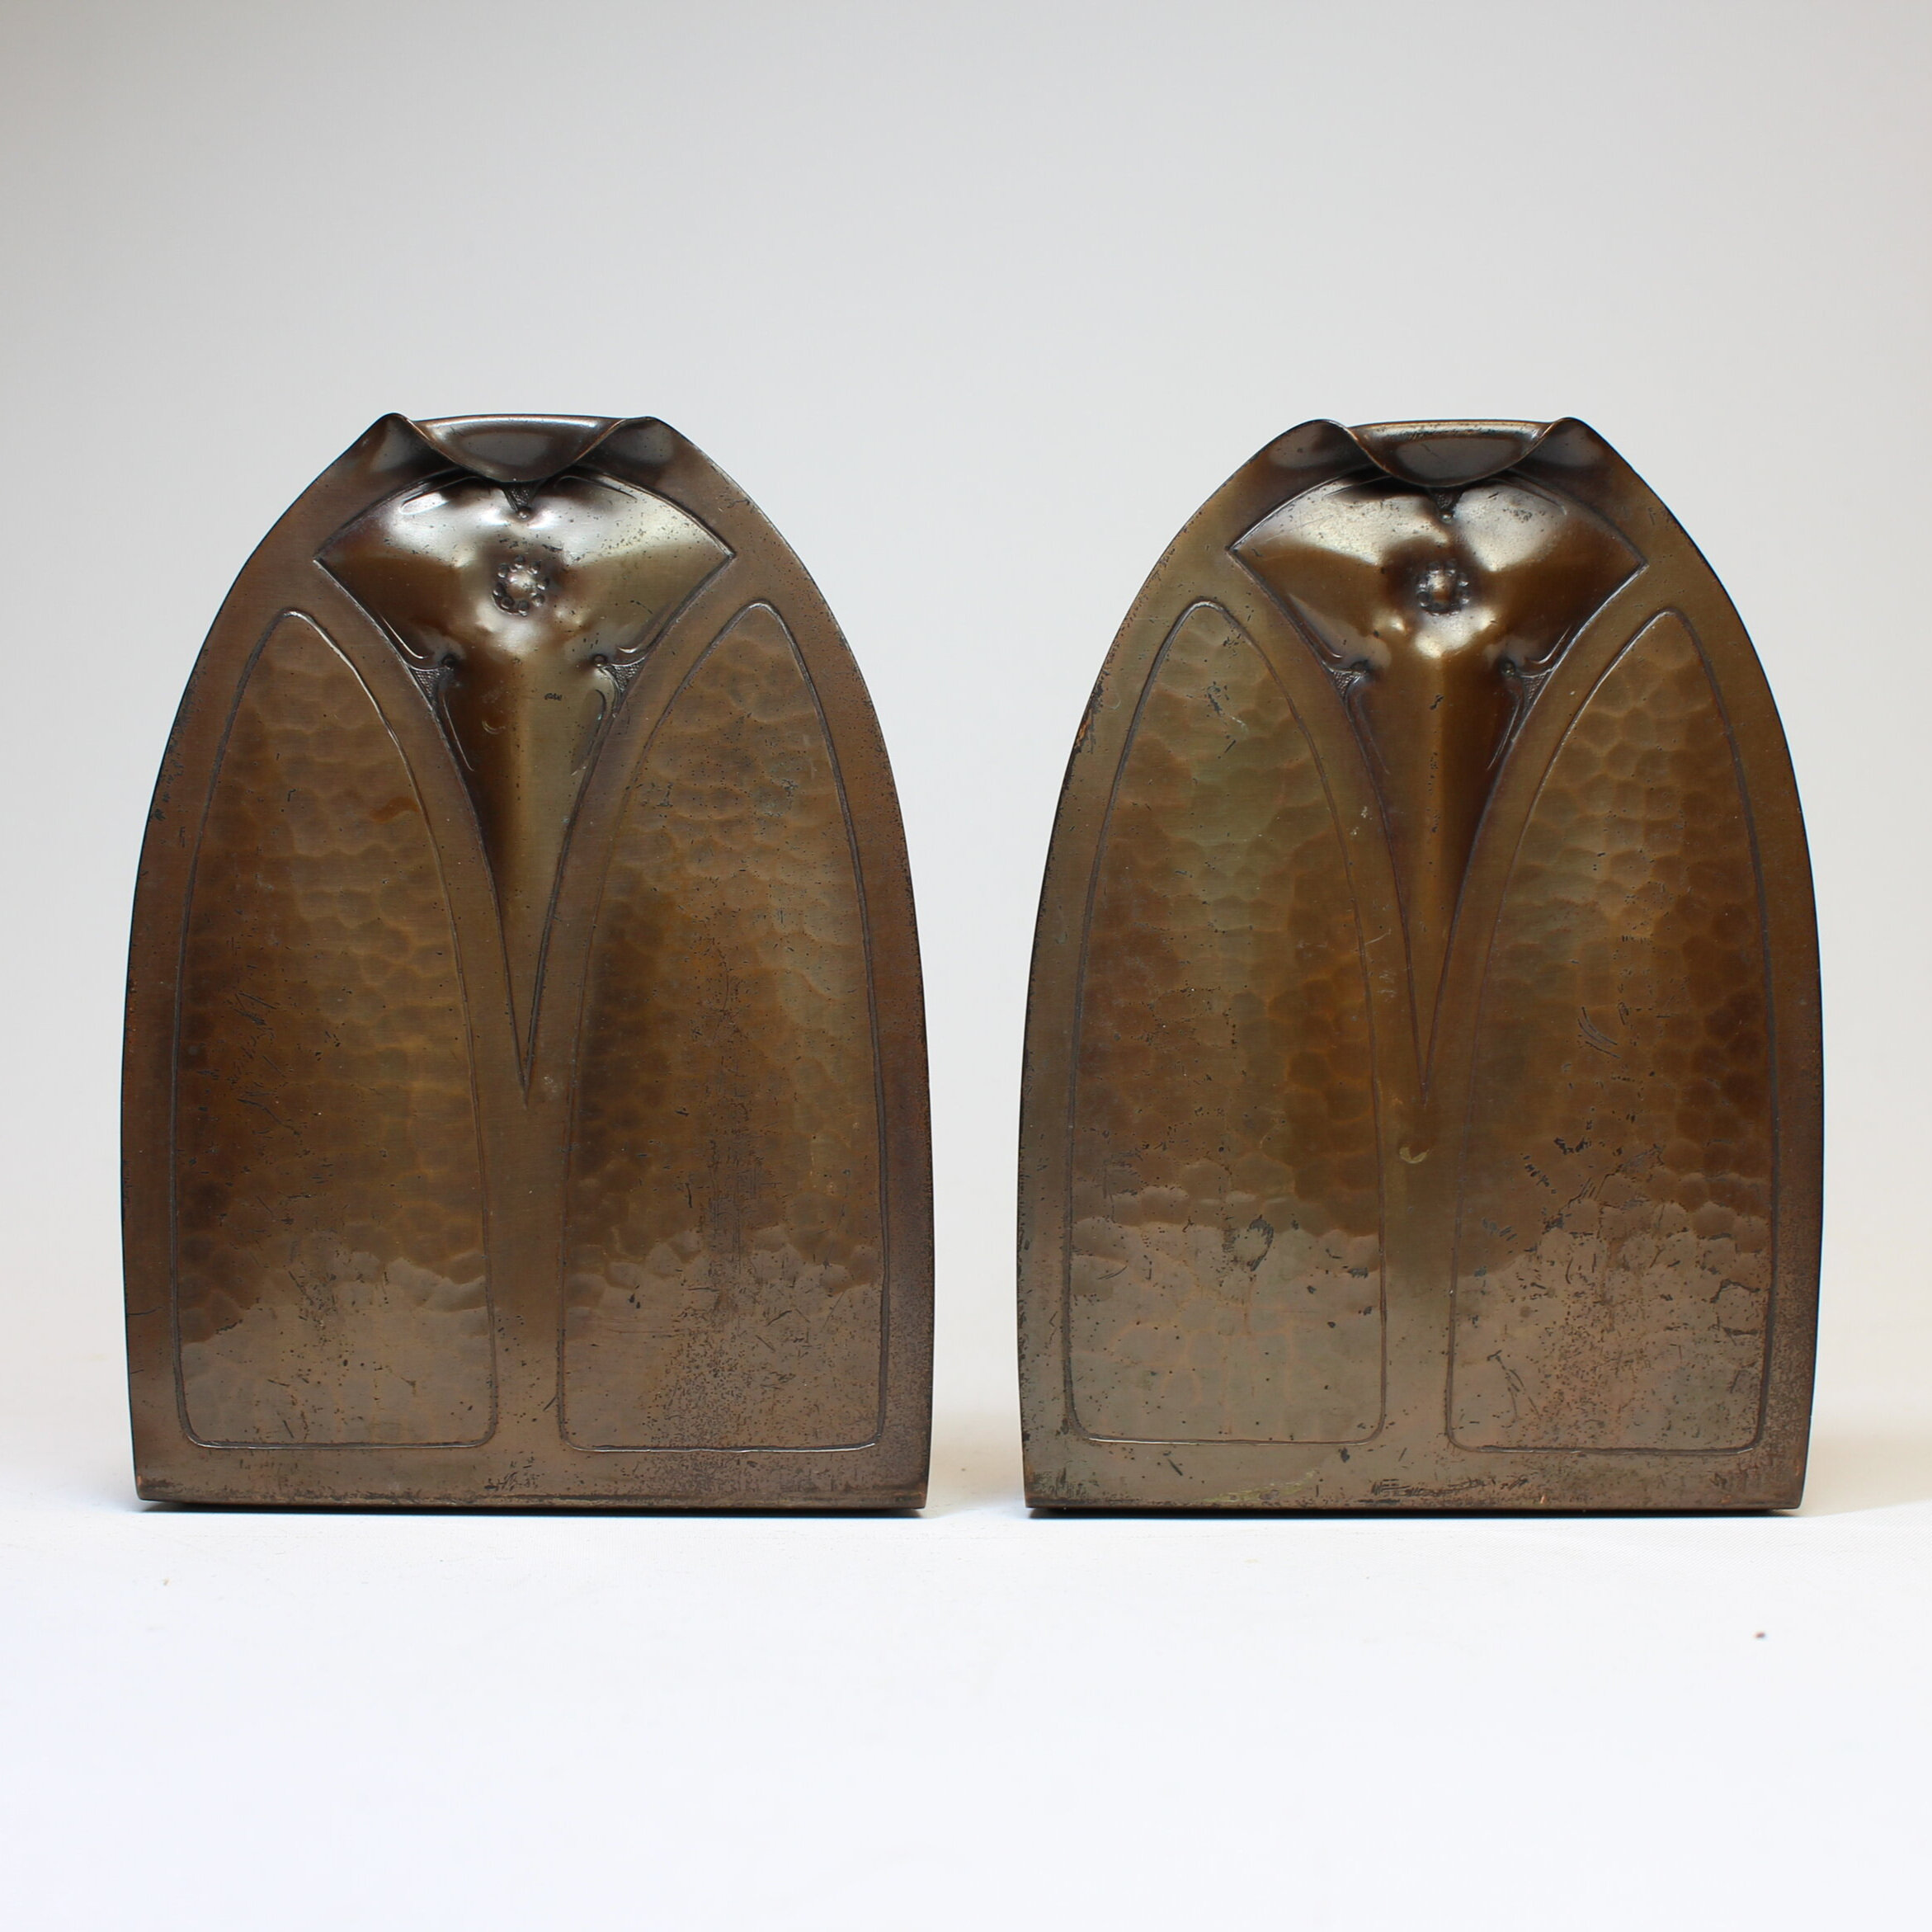 SOLD, Roycroft Early Trefoil Bookends